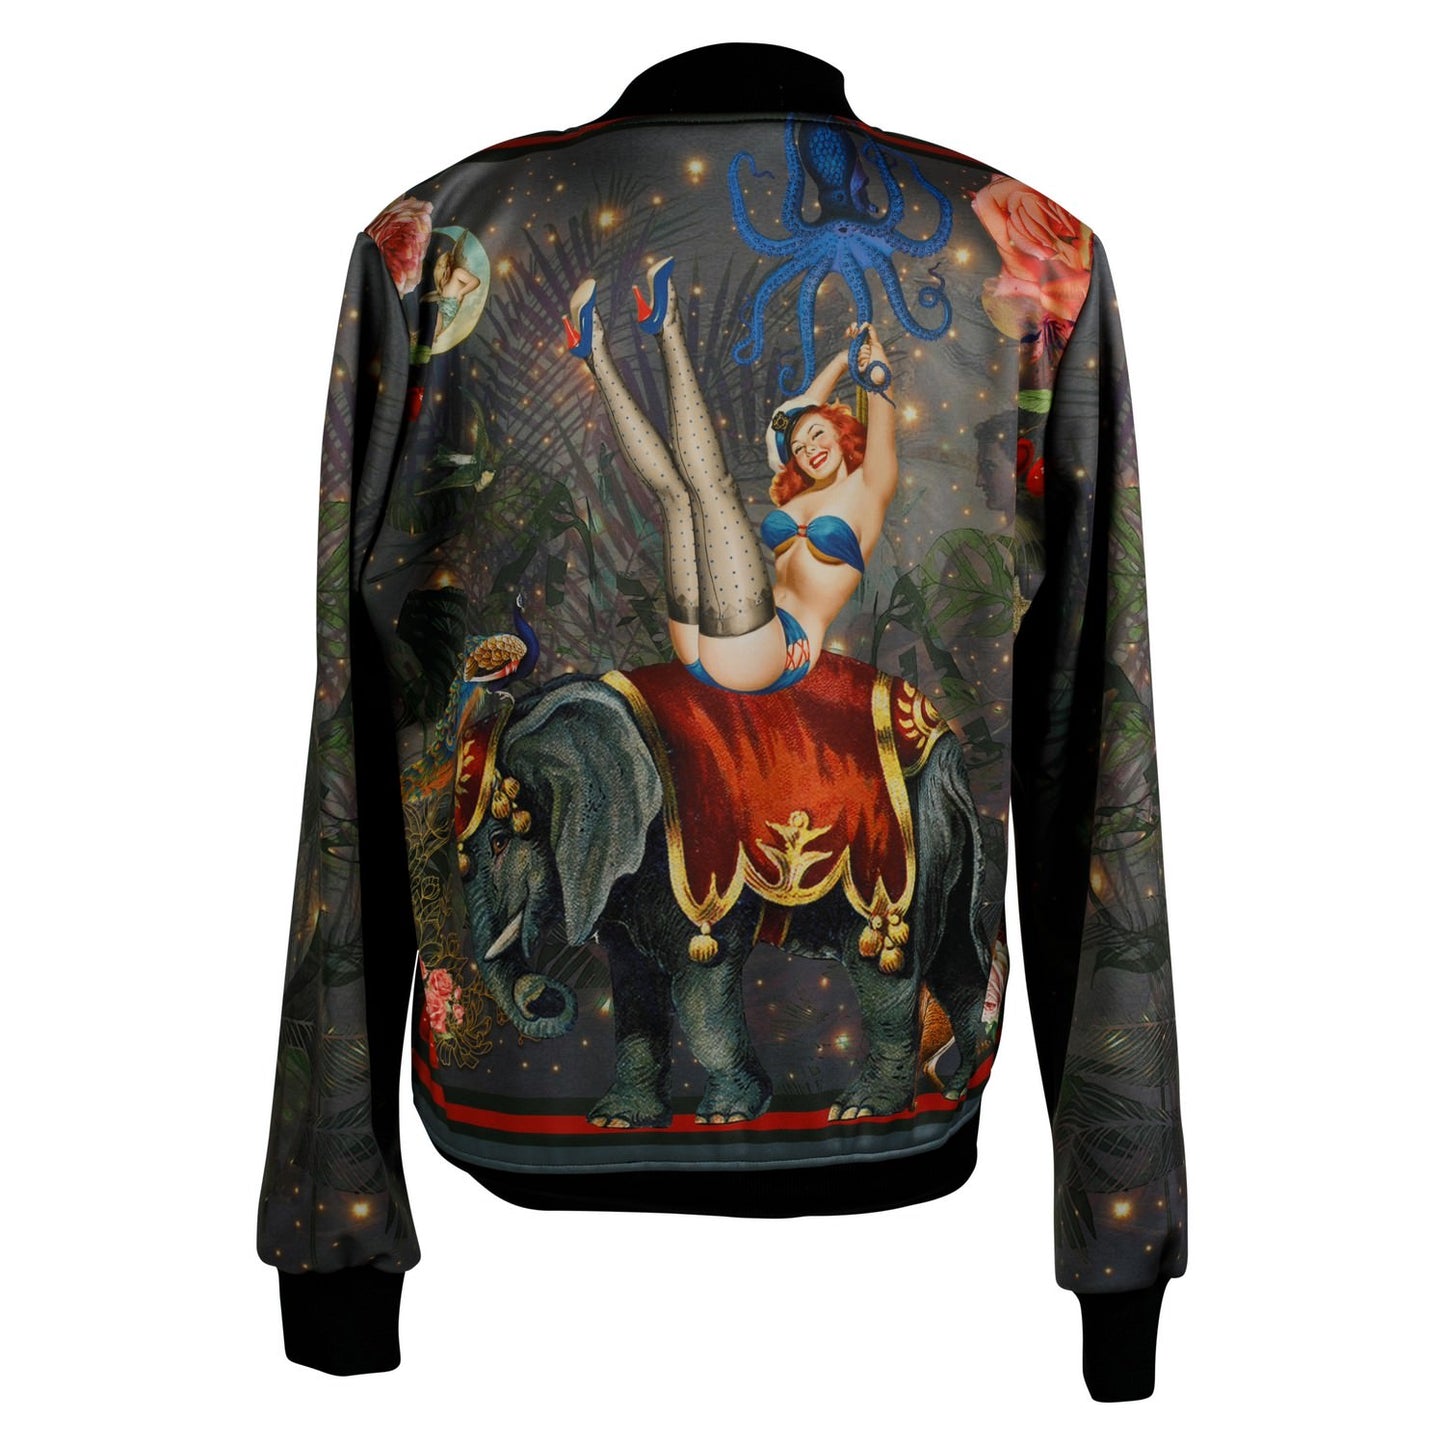 Back view of luxury softshell bomber jacket in a maximalist retro pinup design